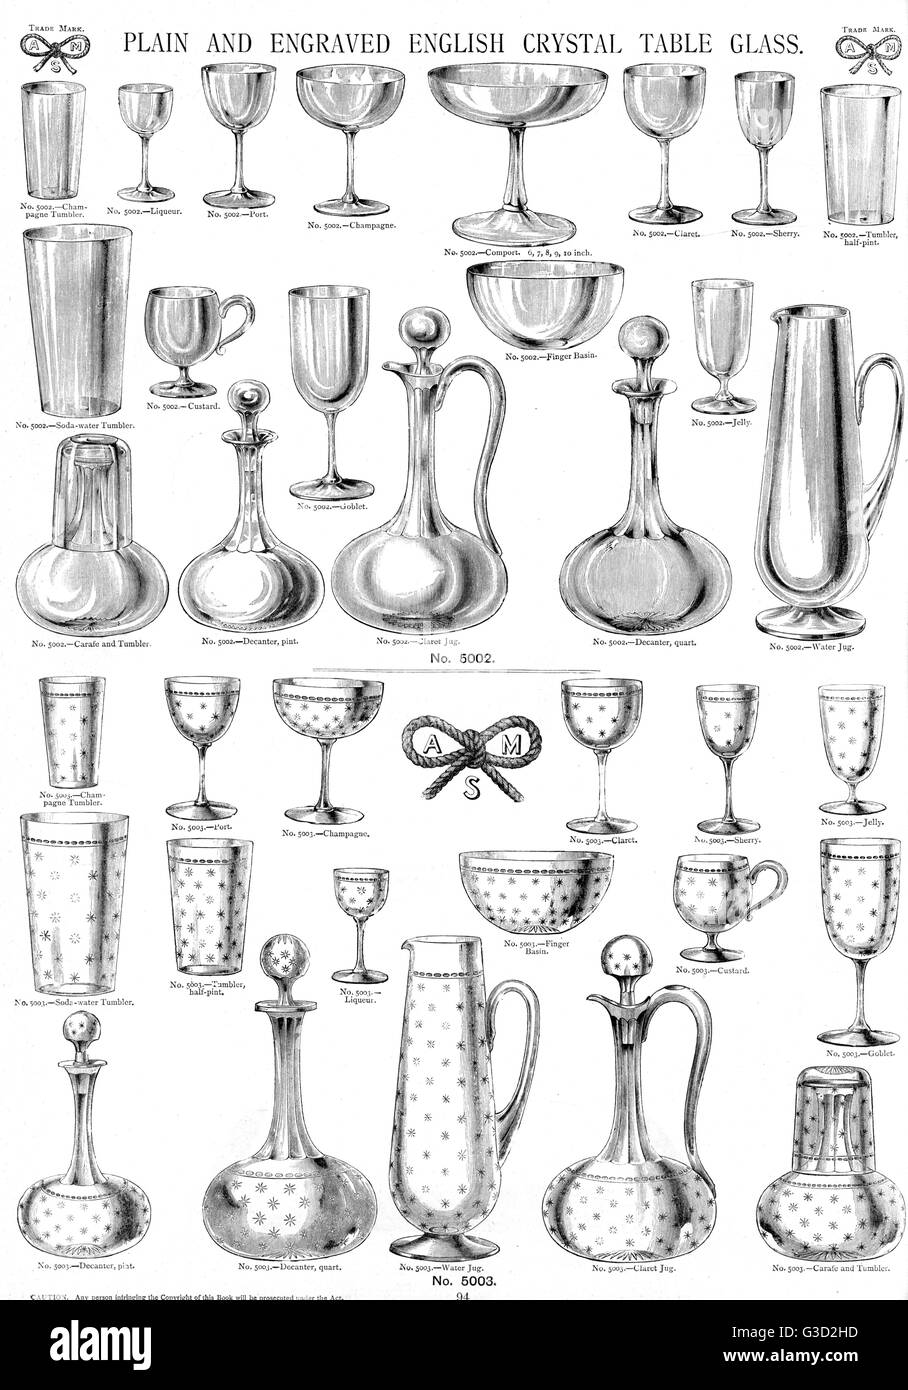 Plain and Engraved English Crystal Table Glass, Plate 94 Stock Photo